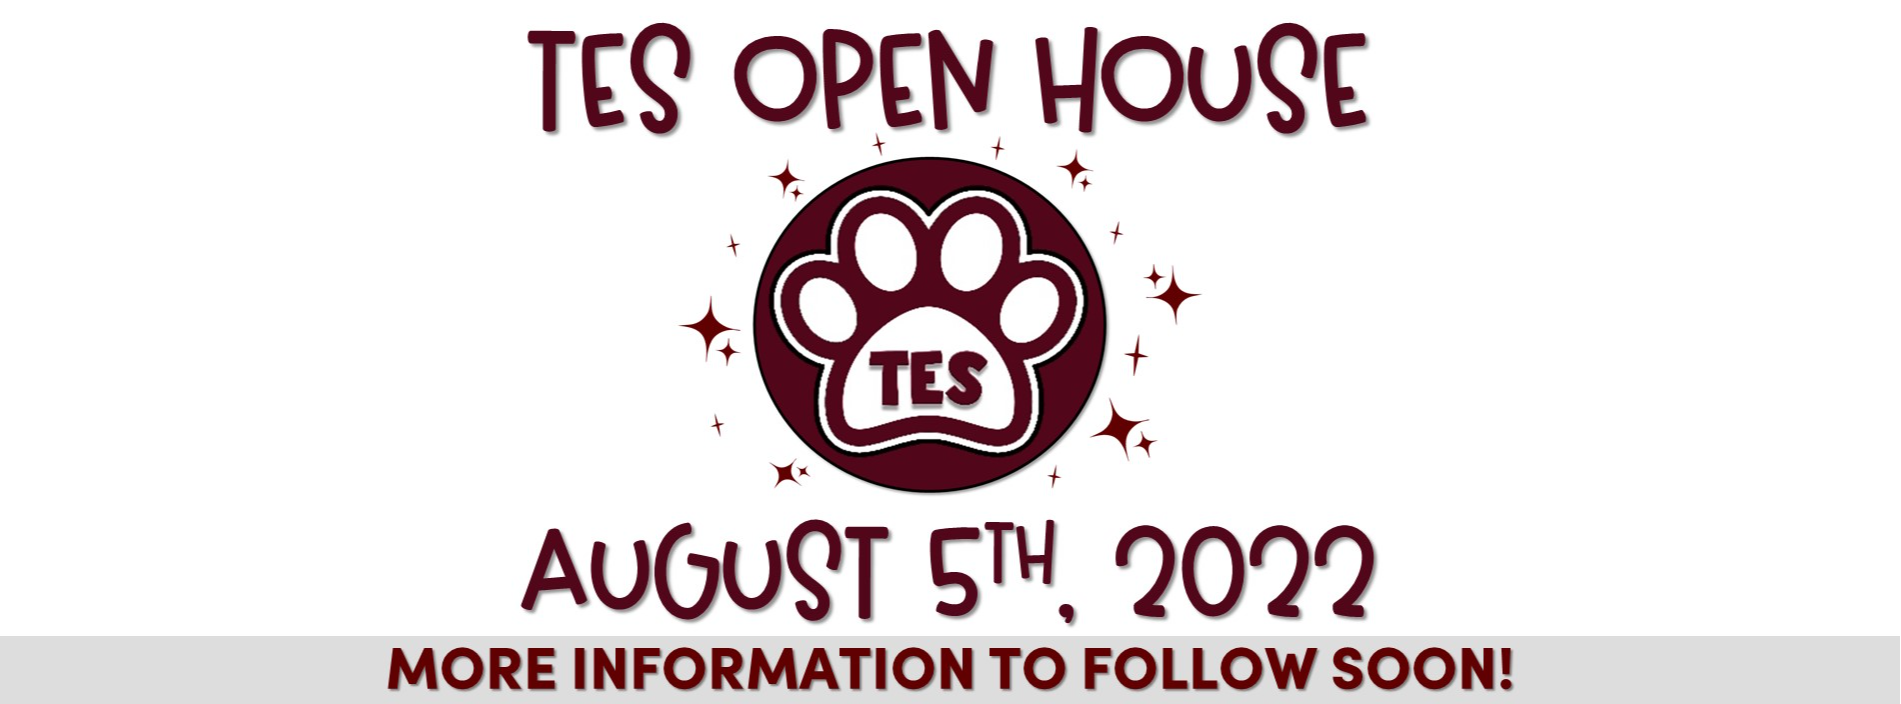 TES OPEN HOUSE: AUGUST 5, 2022! More information to follow soon!